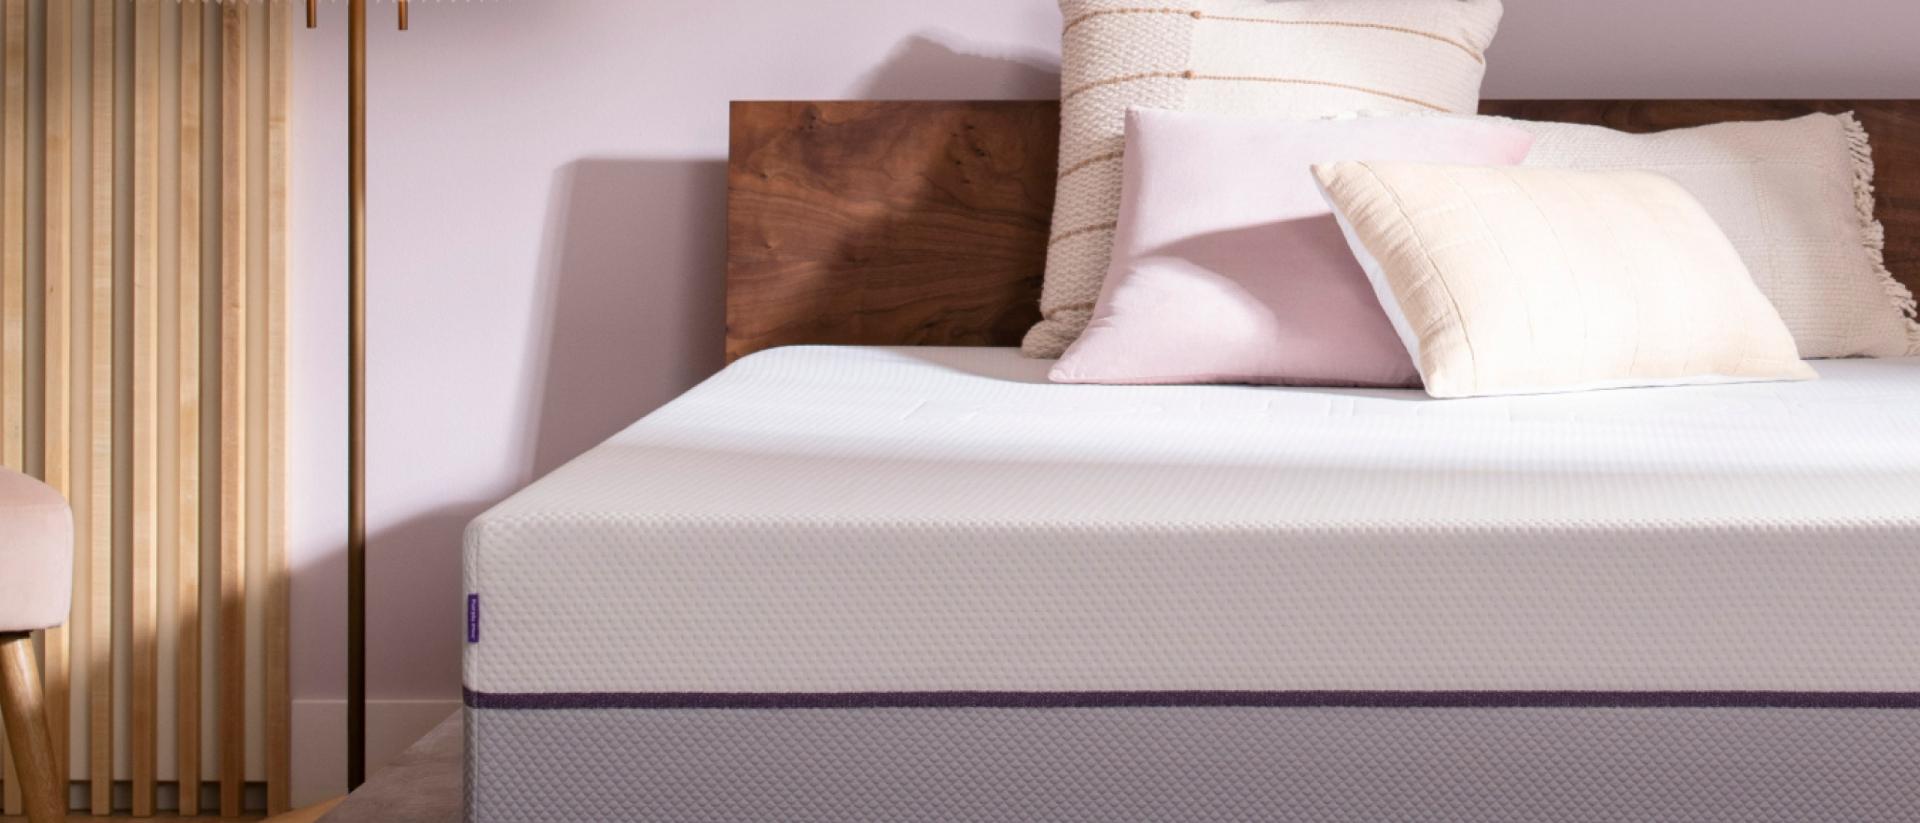 Image of Purple mattress with pillows on it.